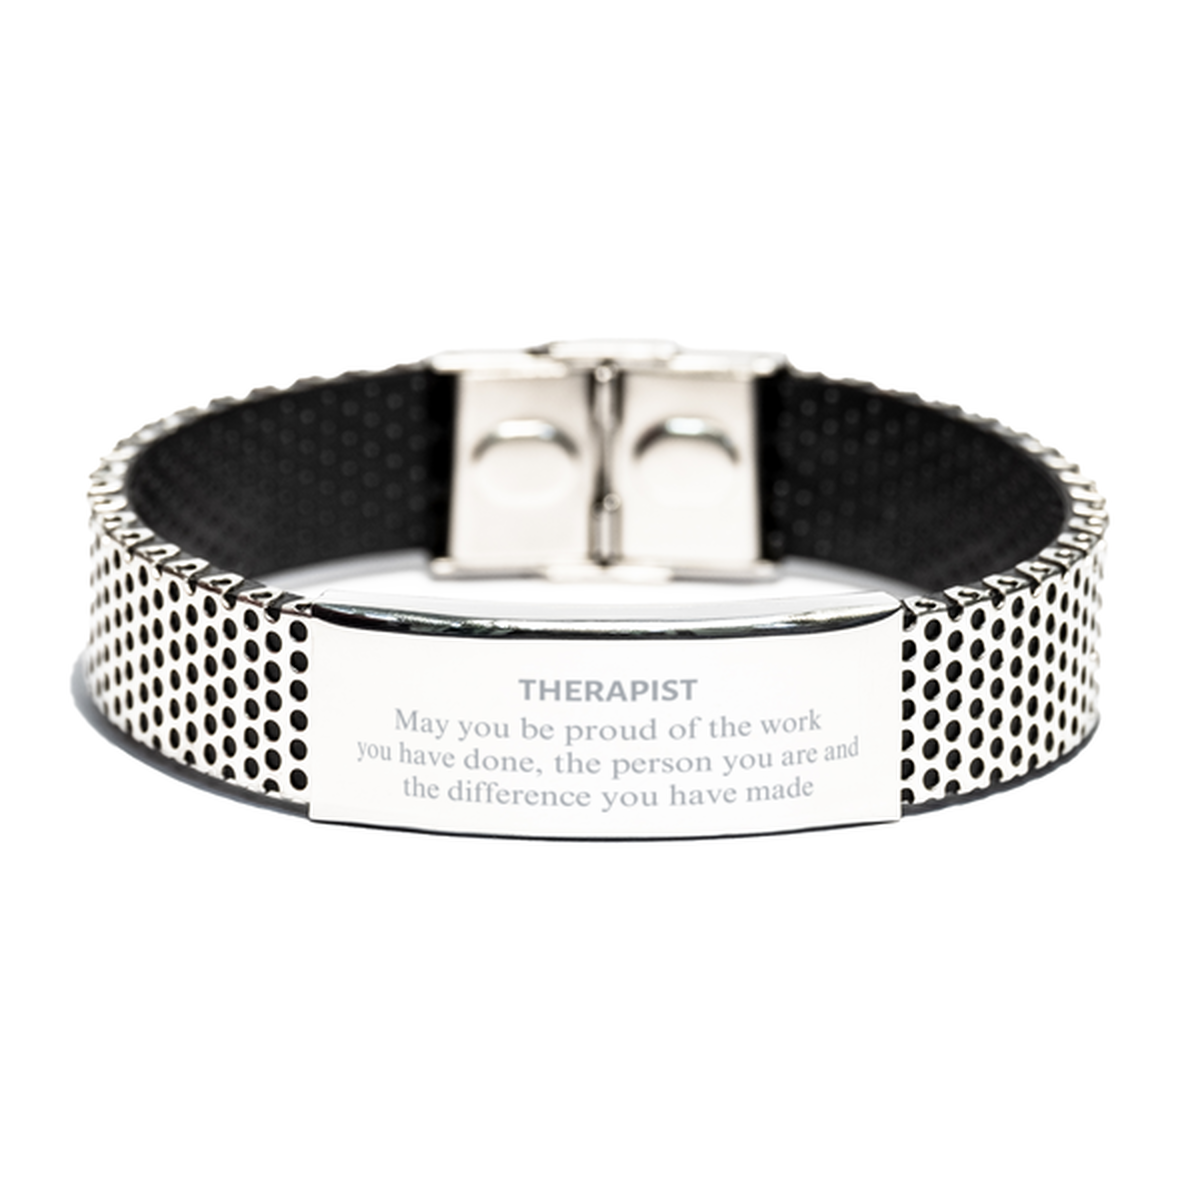 Therapist May you be proud of the work you have done, Retirement Therapist Stainless Steel Bracelet for Colleague Appreciation Gifts Amazing for Therapist